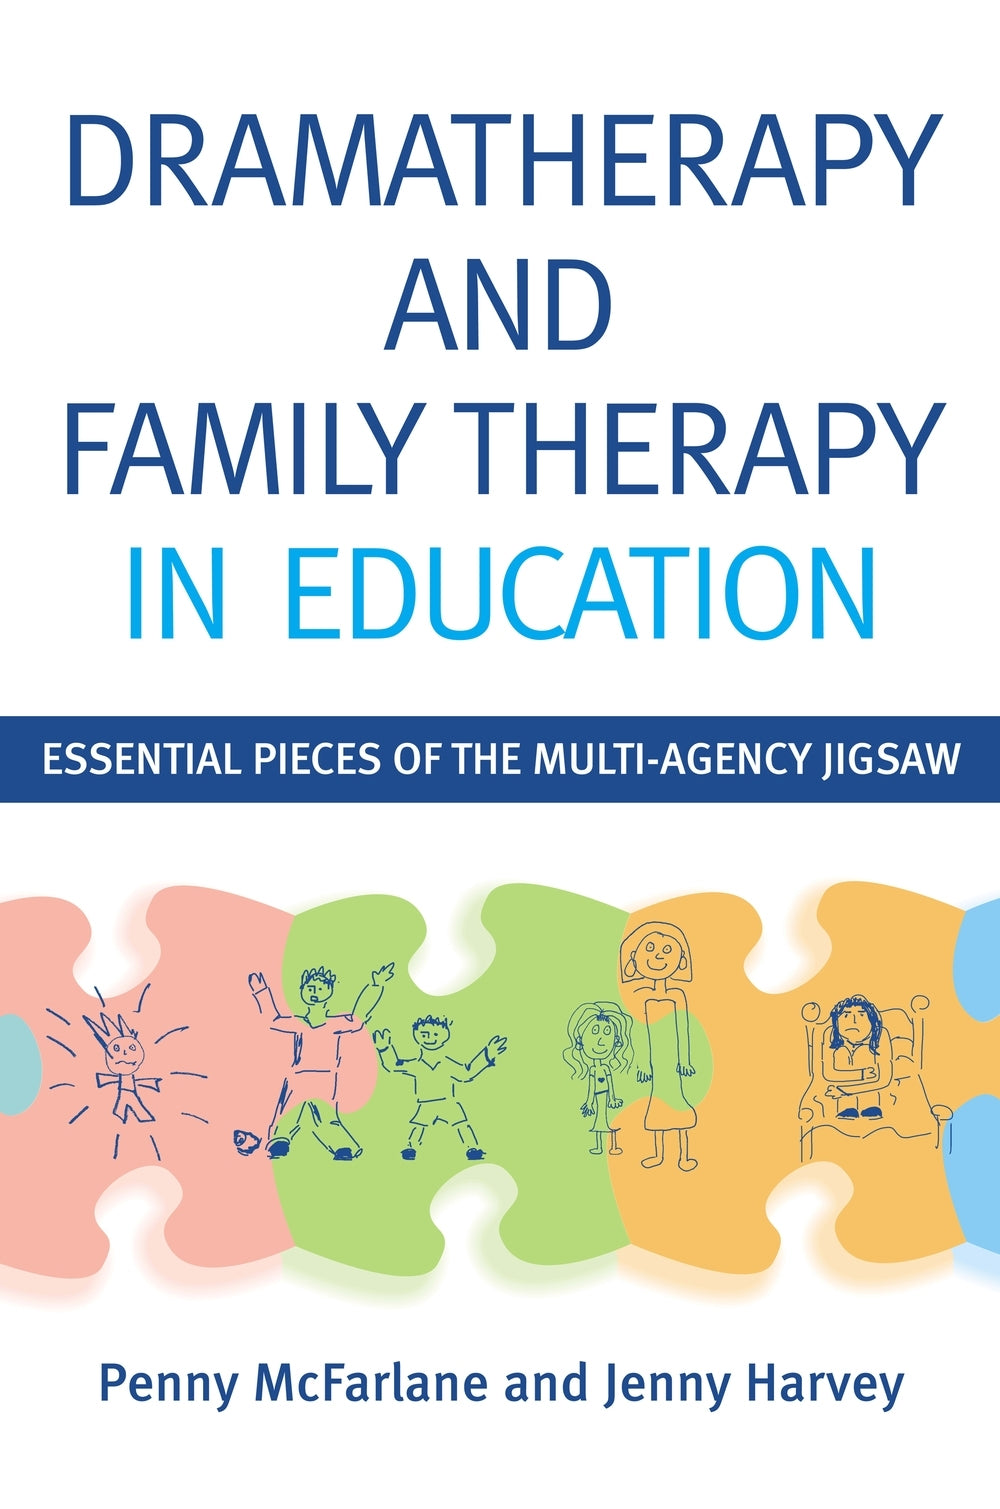 Dramatherapy and Family Therapy in Education by Penny McFarlane, Sue Jennings, Jenny Harvey